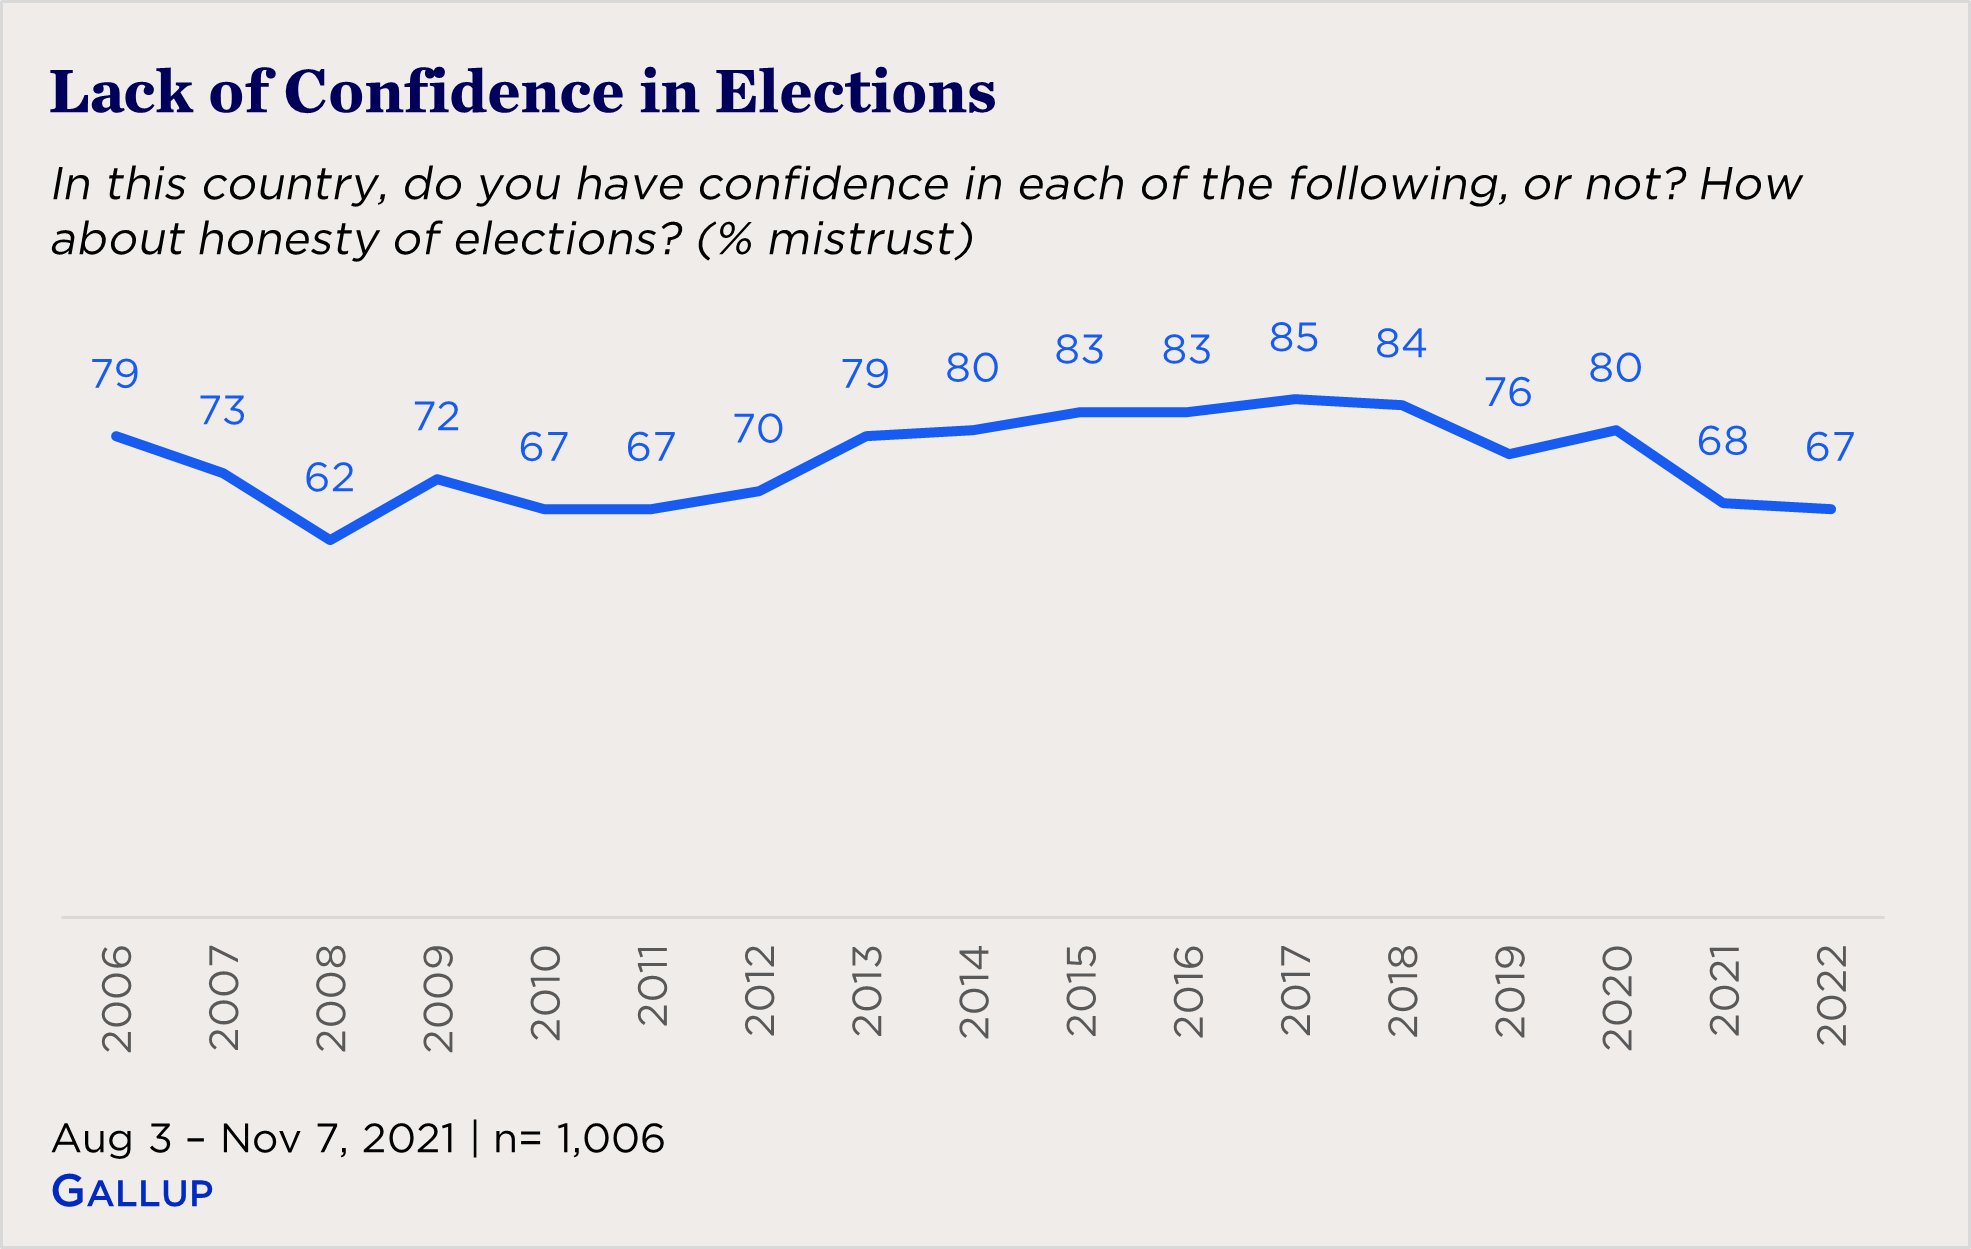 "line chart showing mistrust in elections"